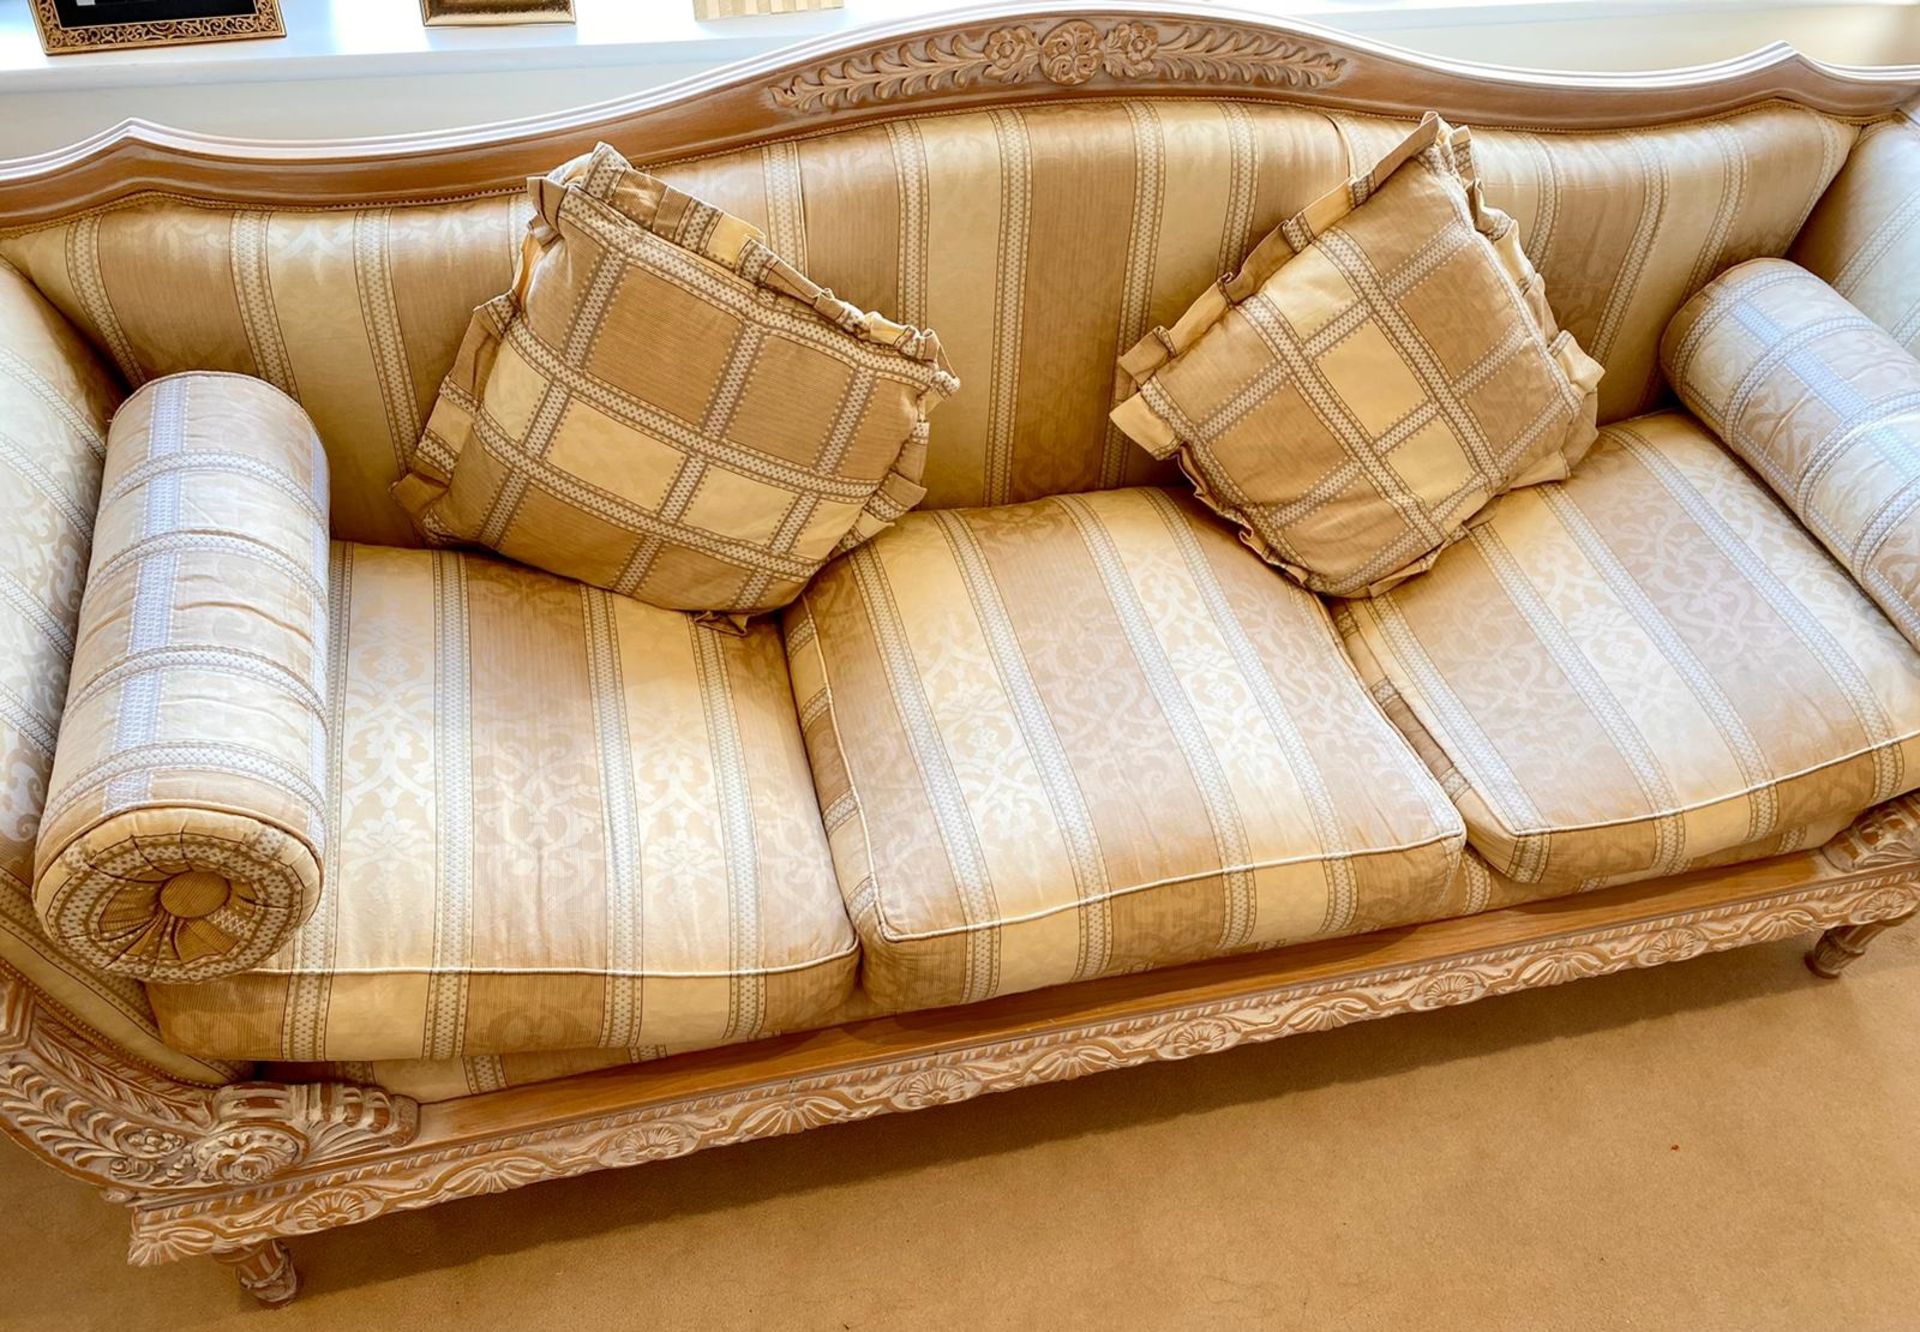 1 x French 19th Century Provincial Style Three Piece Sofa and Chair Set With Beautifully Carved Wood - Image 3 of 41